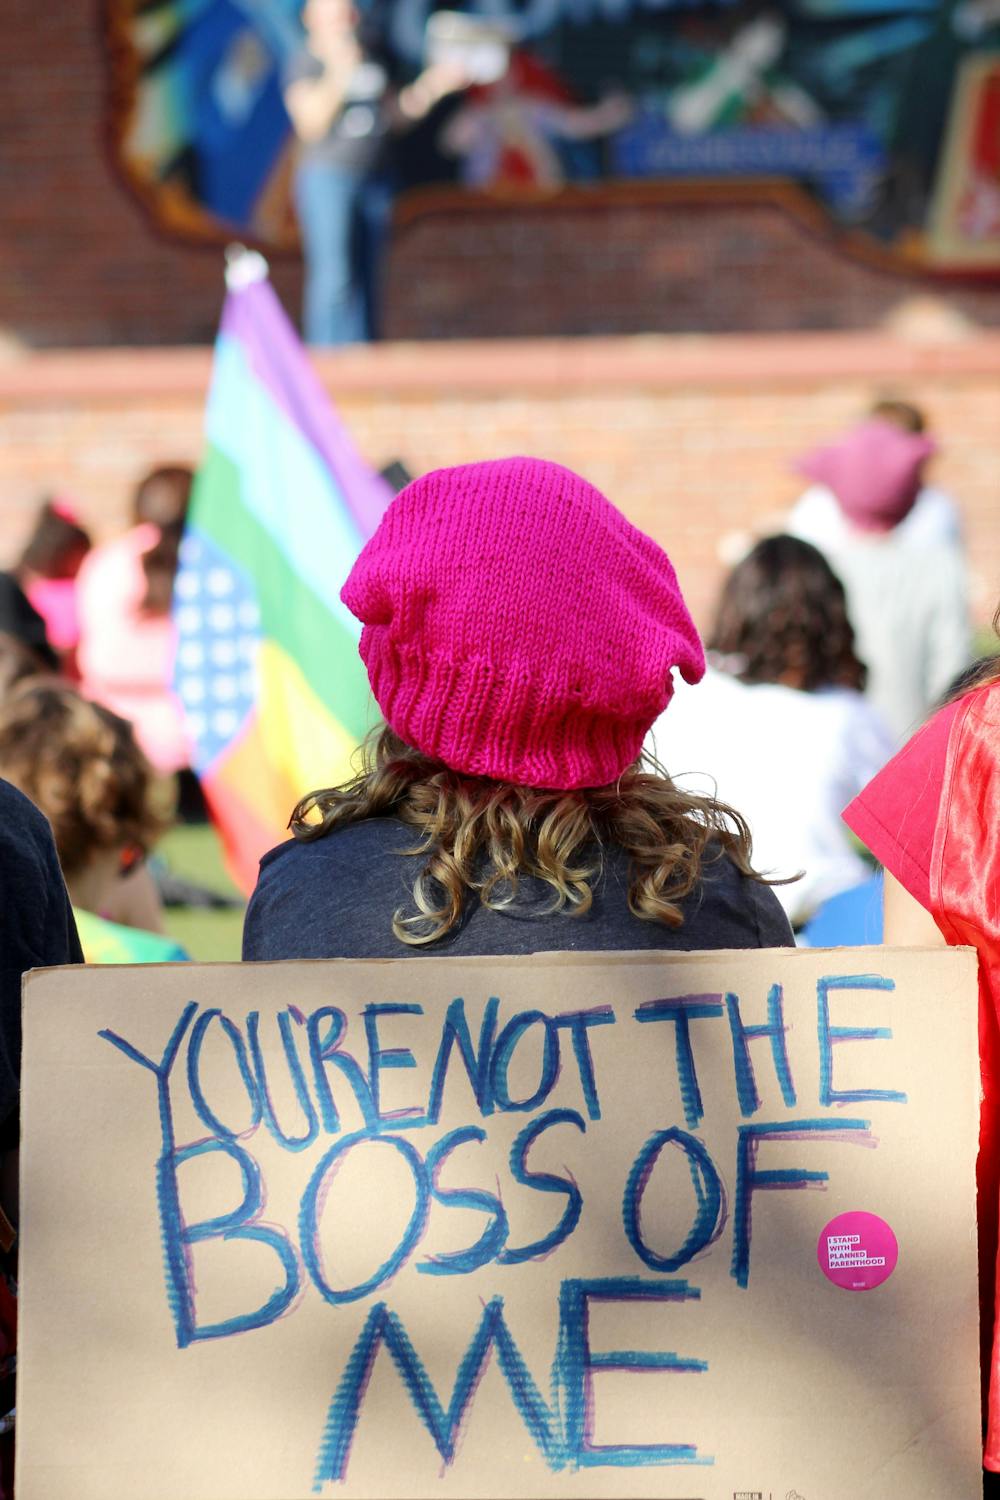 <p>A protester wearing the signature pink knit hat to the Women's Resistance movement sits among a crowd of protesters gathered on Bo Diddley Community Plaza to listen to speakers before marching down University Avenue to raise support for female involvement in the American political process. Donations were collected for areas affected by the 2017 hurricane season.</p>